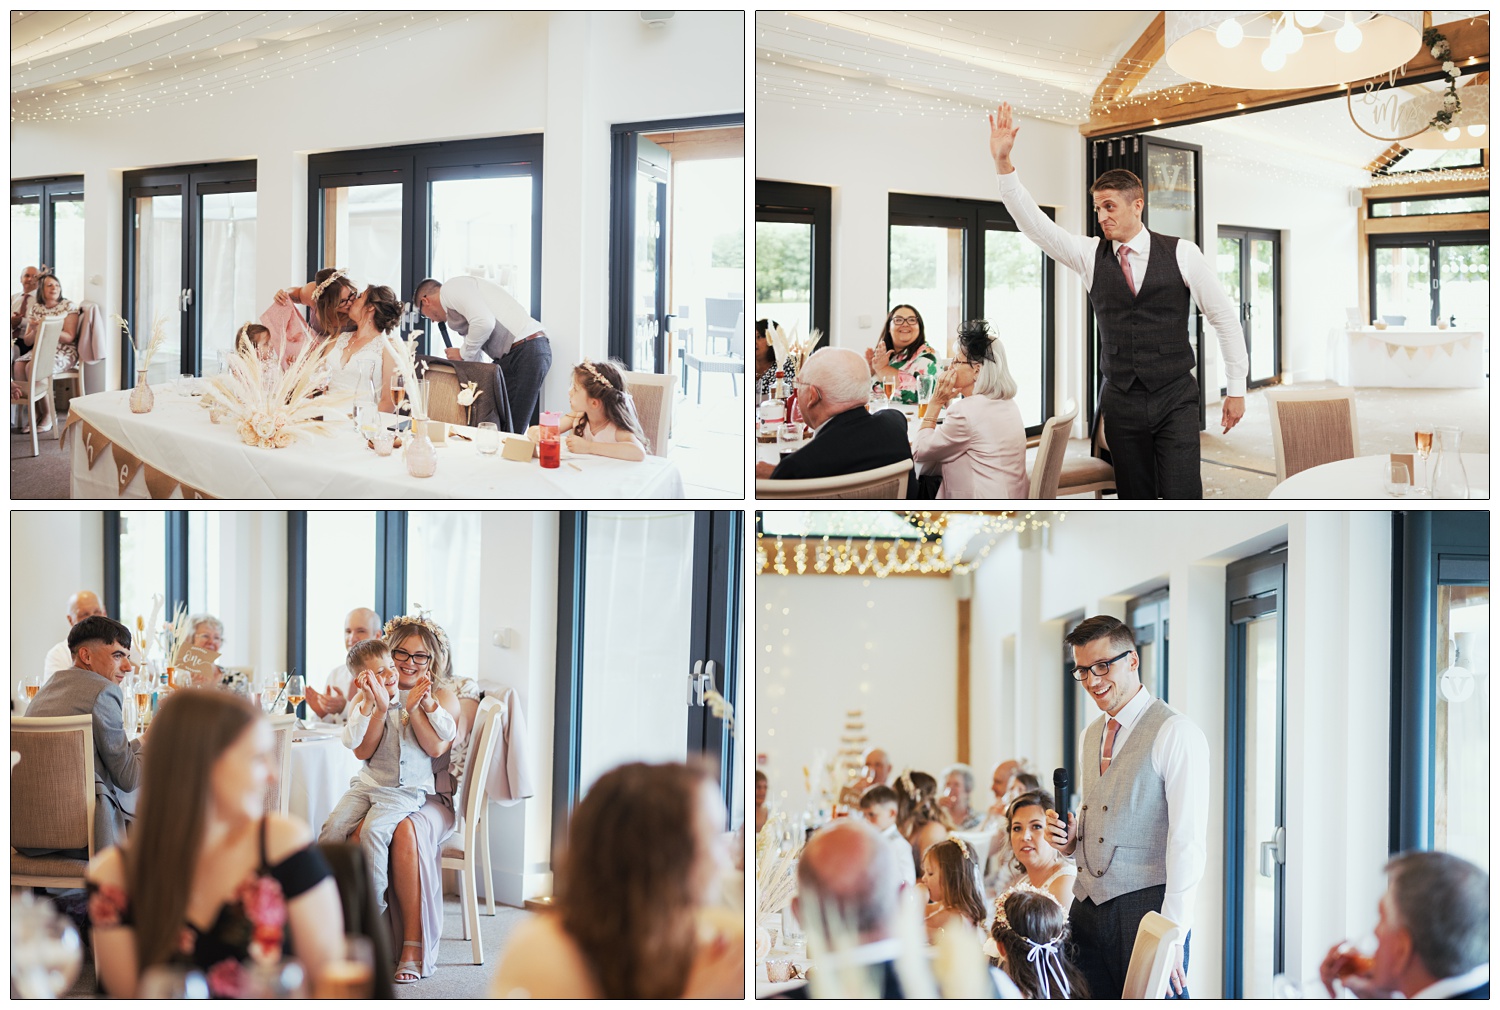 Candid moments from the wedding speeches.